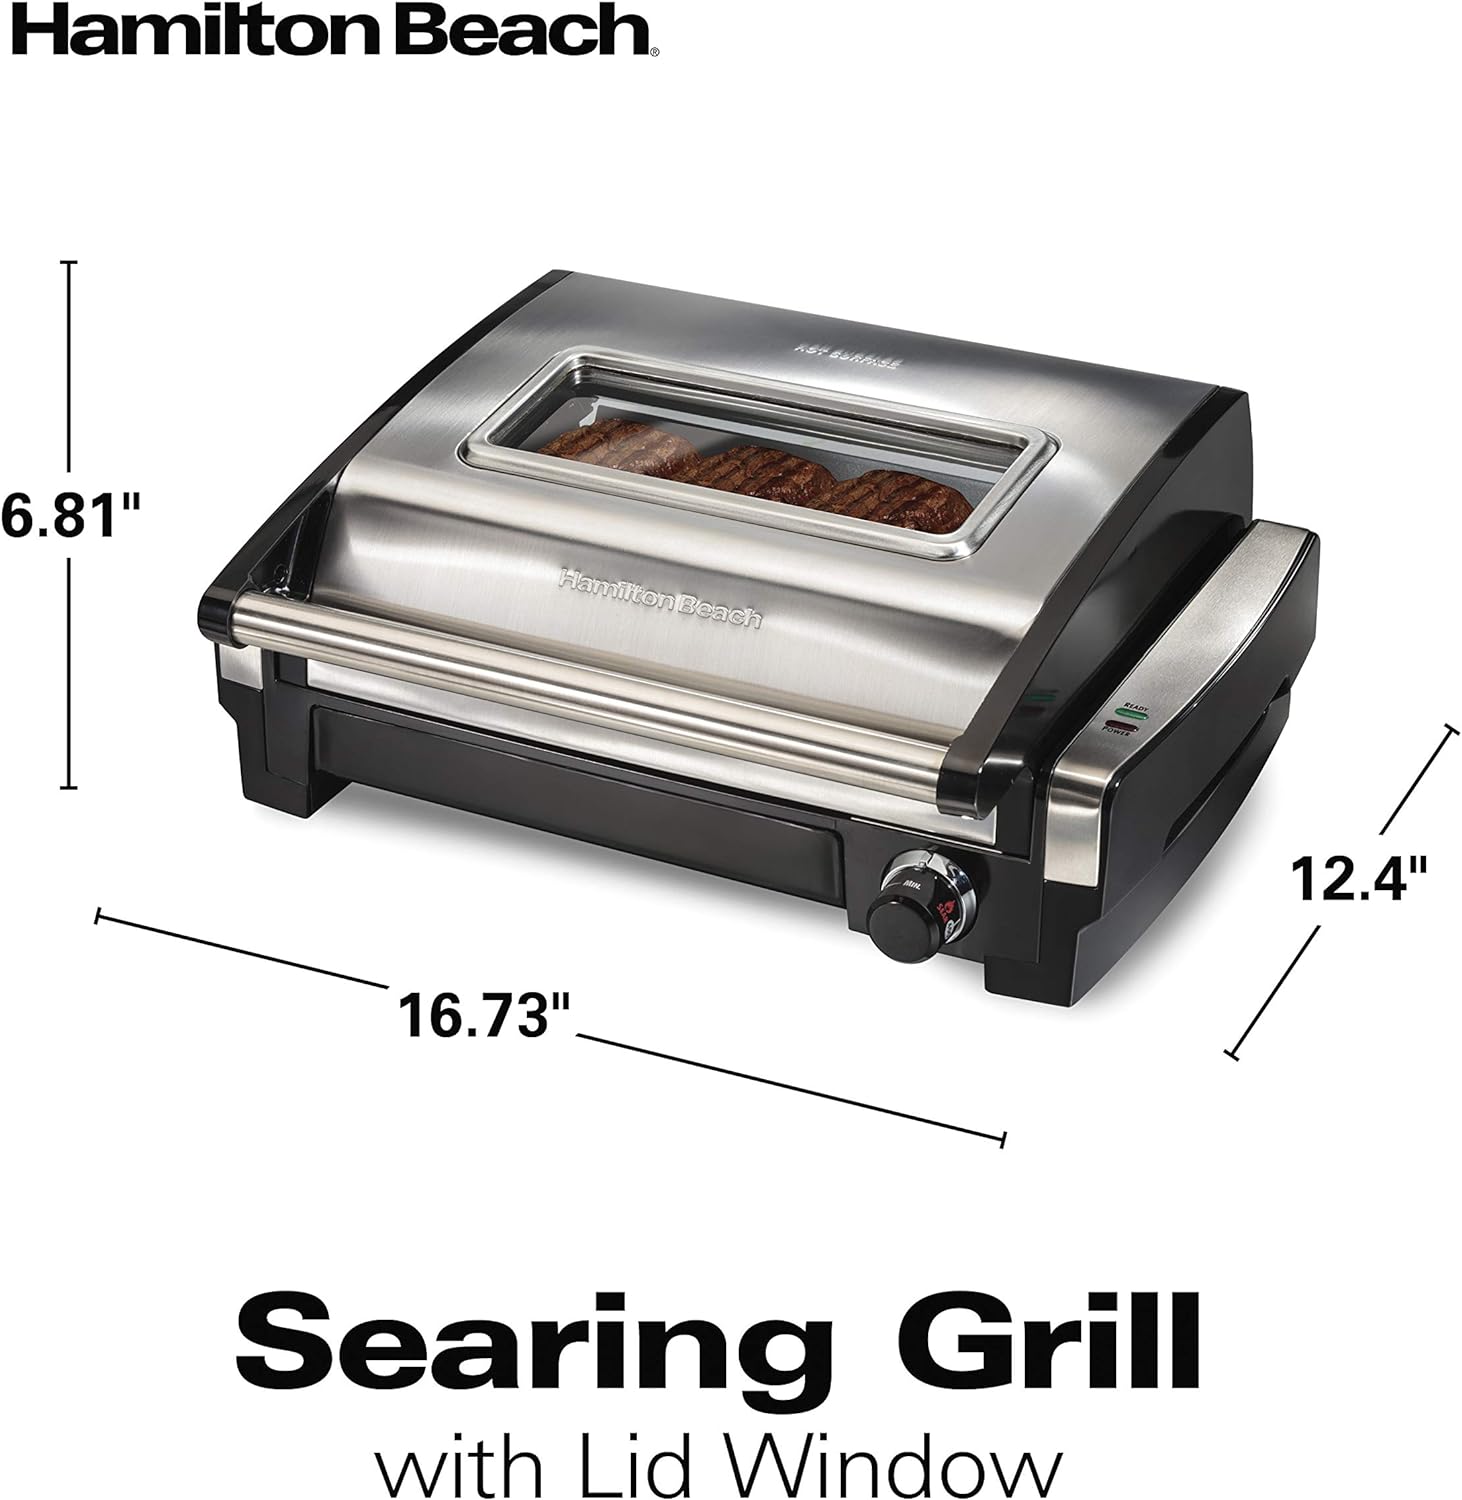 Hamilton Beach Electric Indoor Searing Grill with Viewing Window  Adjustable Temperature Control to 450F, 118 sq. in. Surface Serves 6, Removable Nonstick Grate, Stainless Steel